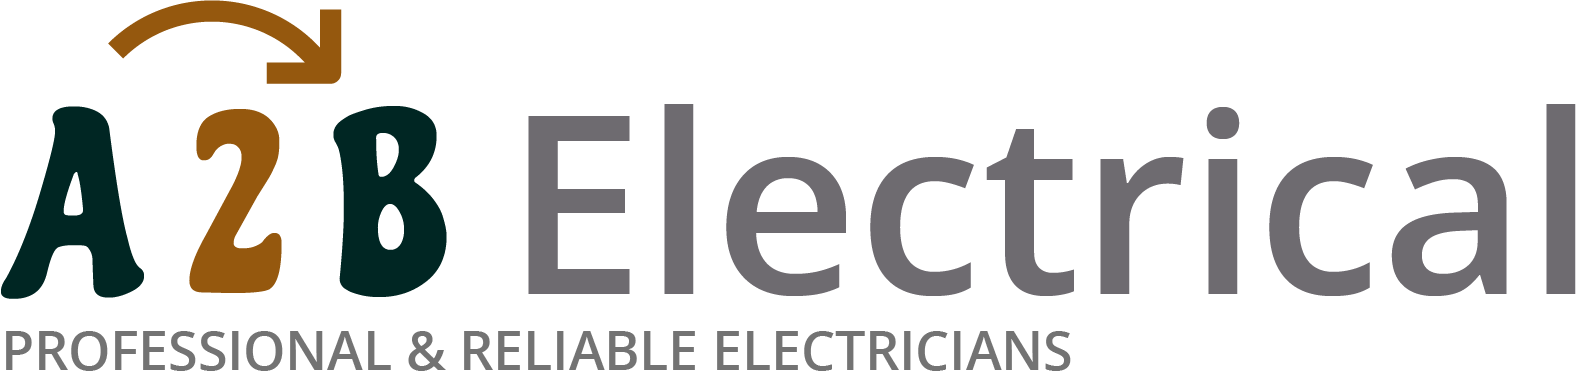 If you have electrical wiring problems in Baldock, we can provide an electrician to have a look for you. 